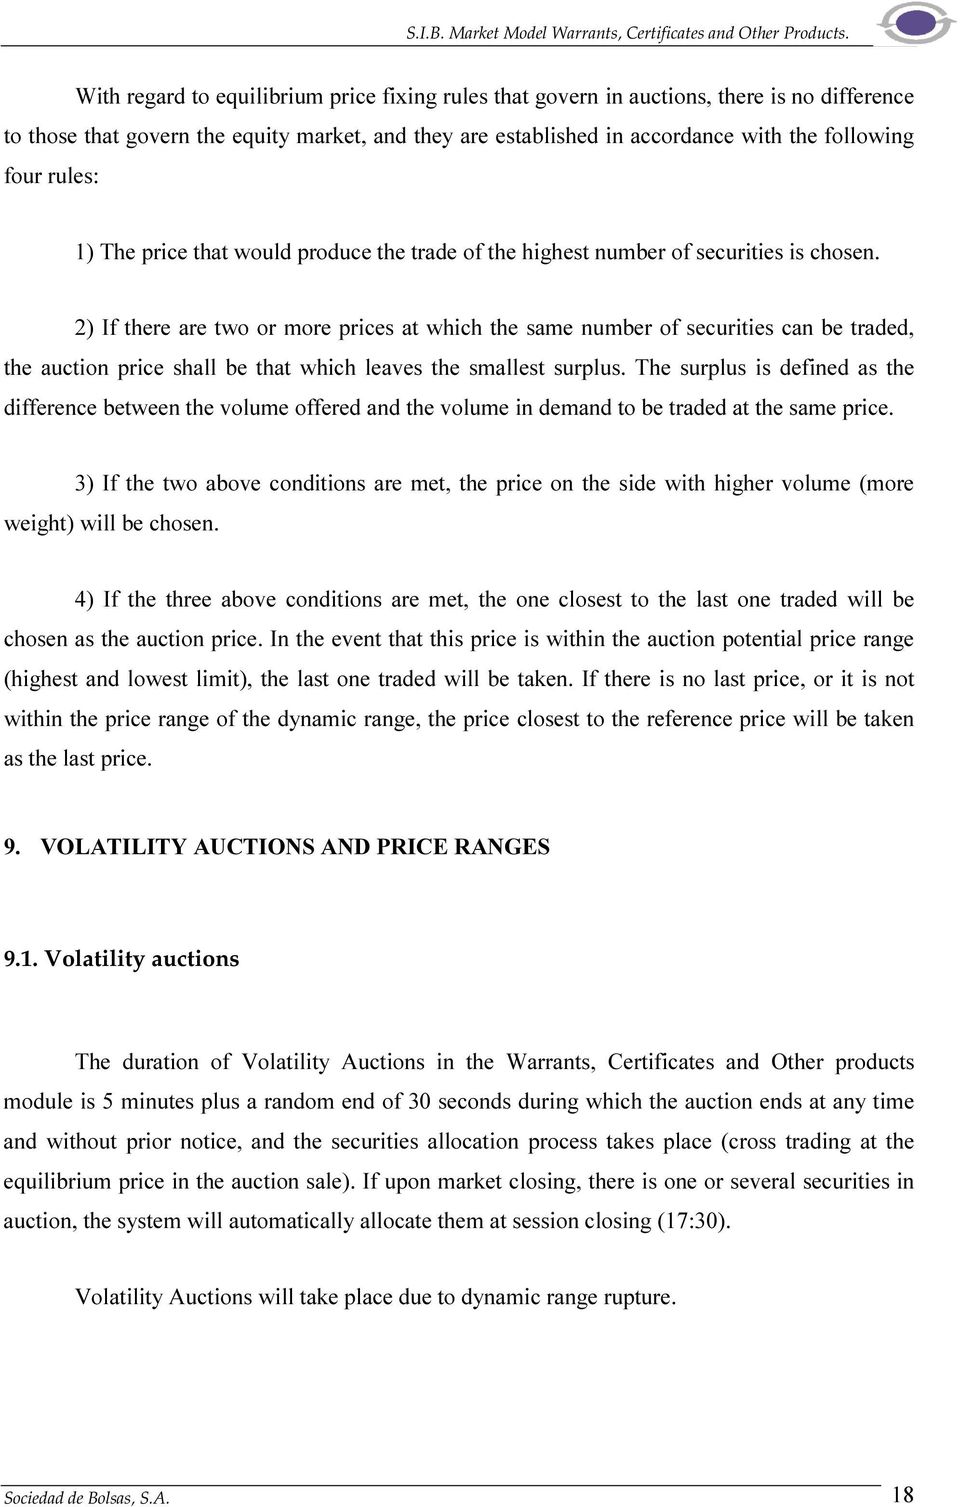 2) If there are two or more prices at which the same number of securities can be traded, the auction price shall be that which leaves the smallest surplus.